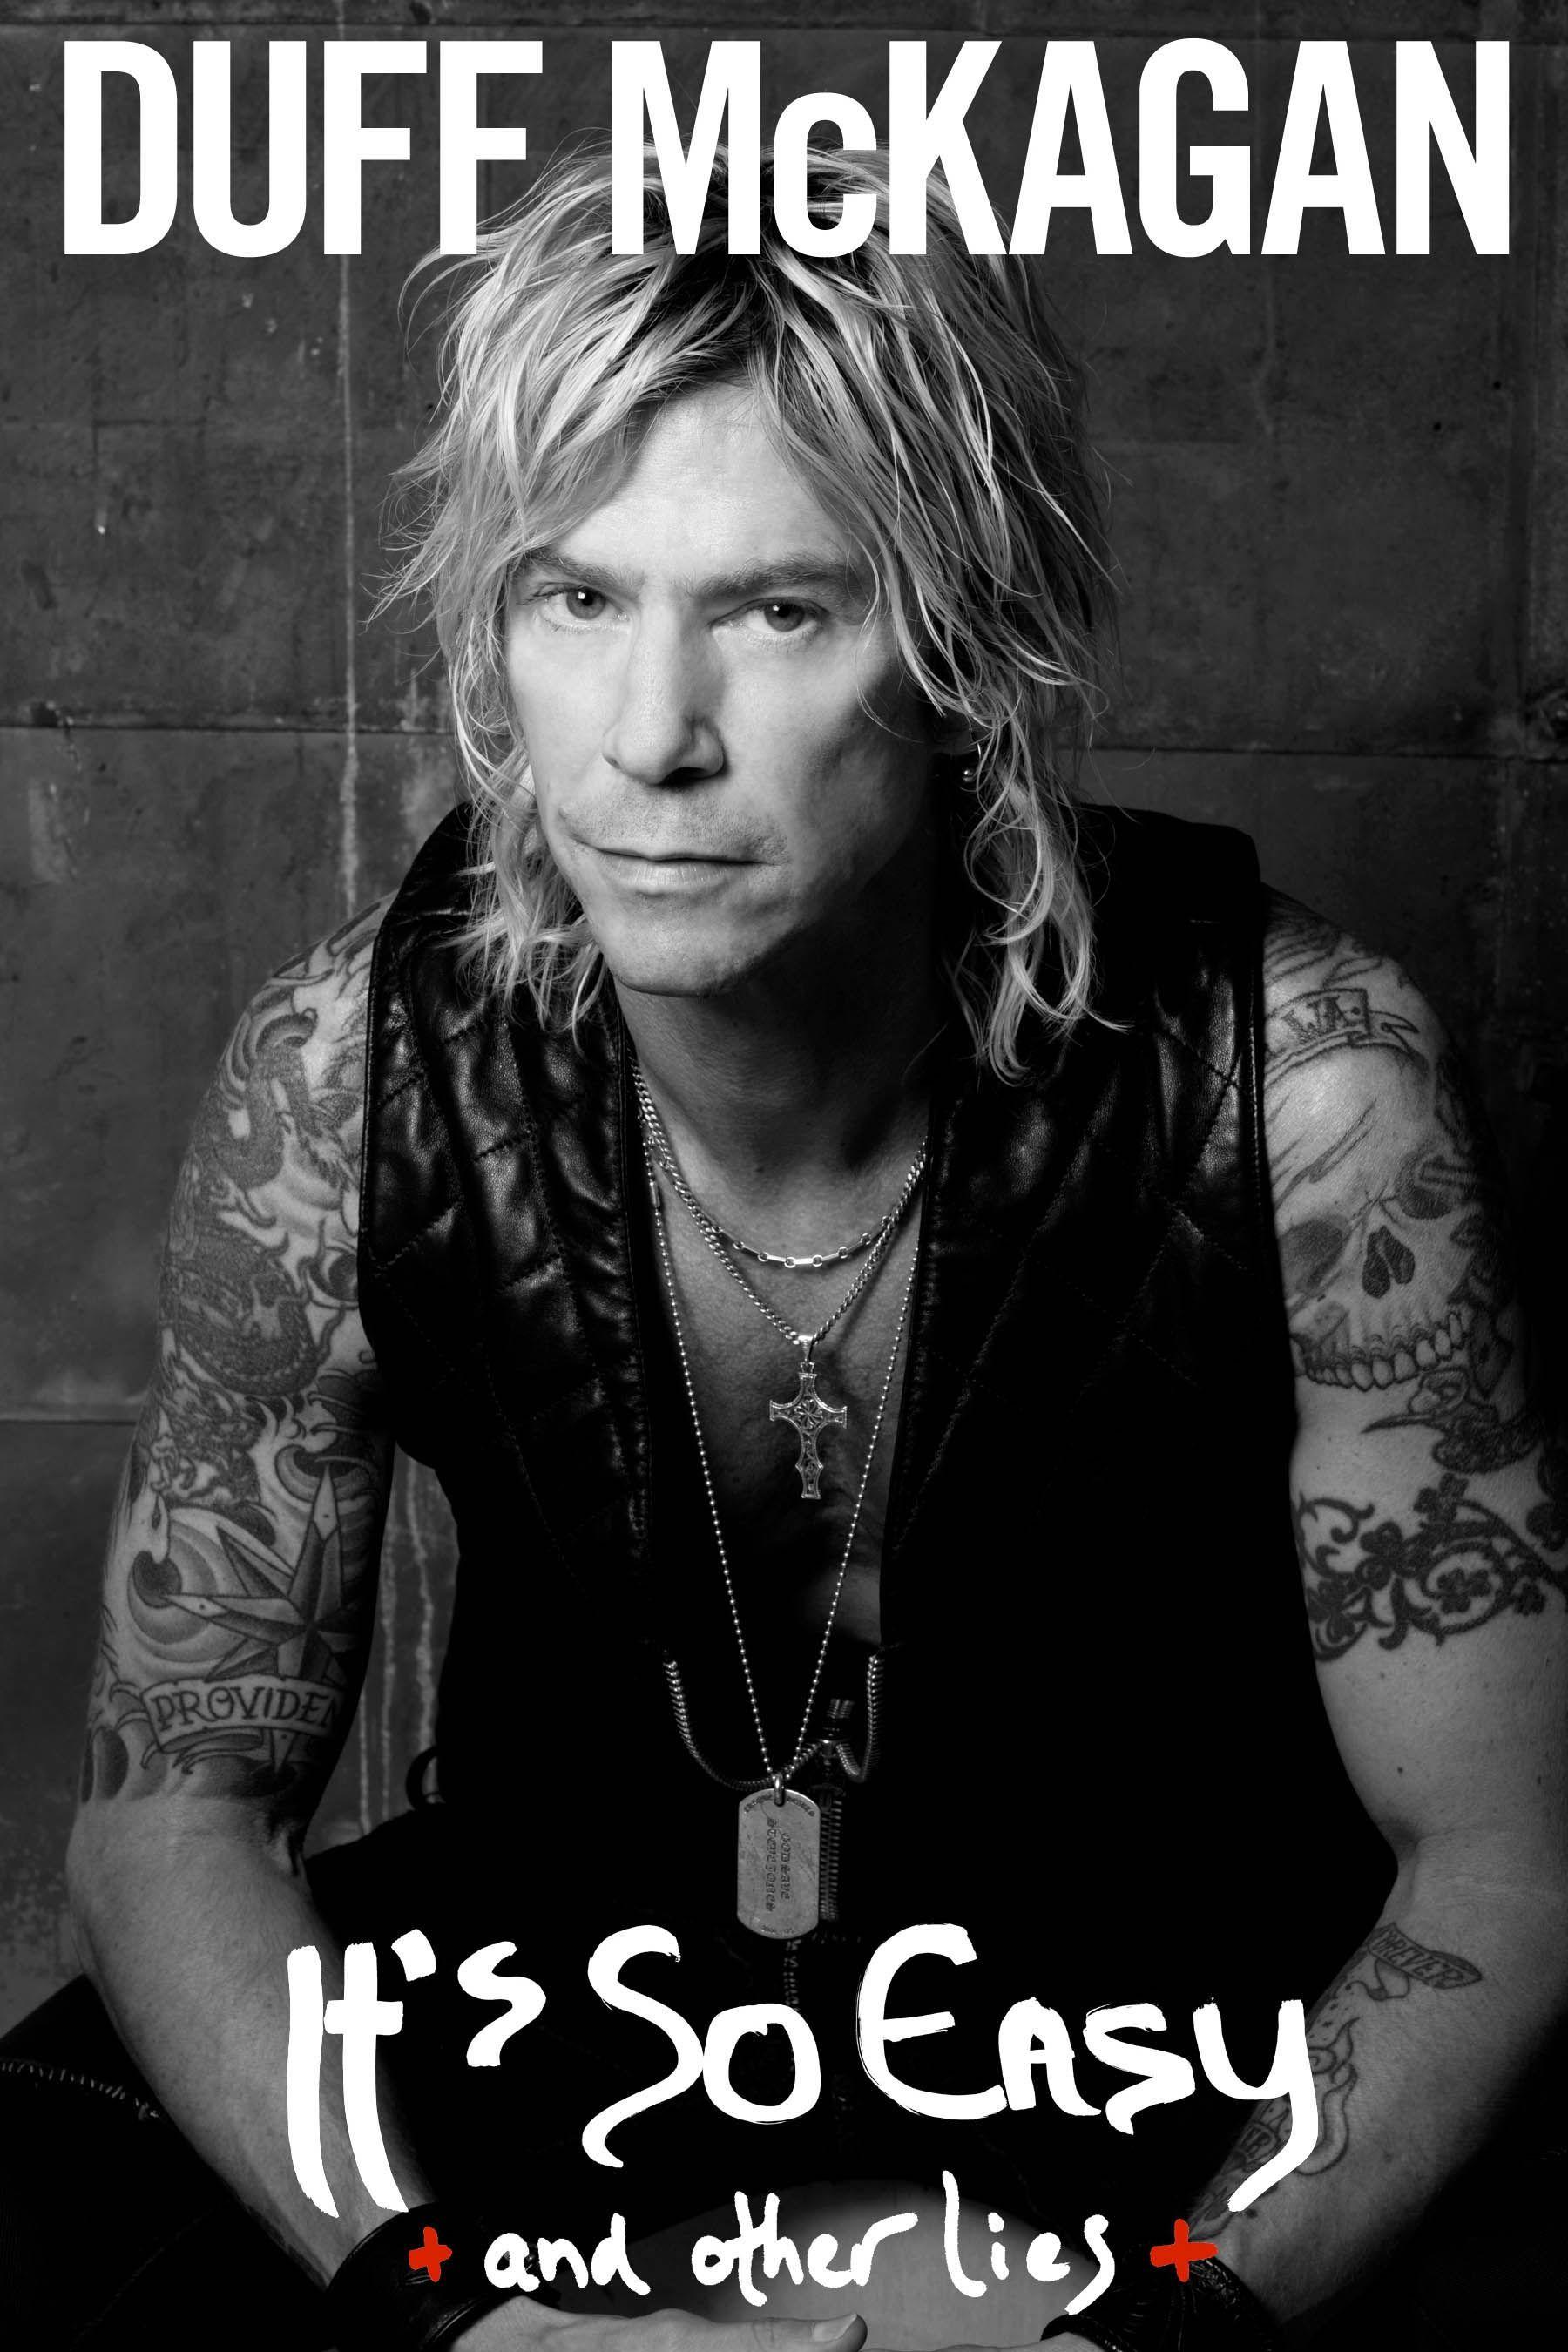 It's So Easy by Duff McKagan. Bassist of Guns & Roses as well as